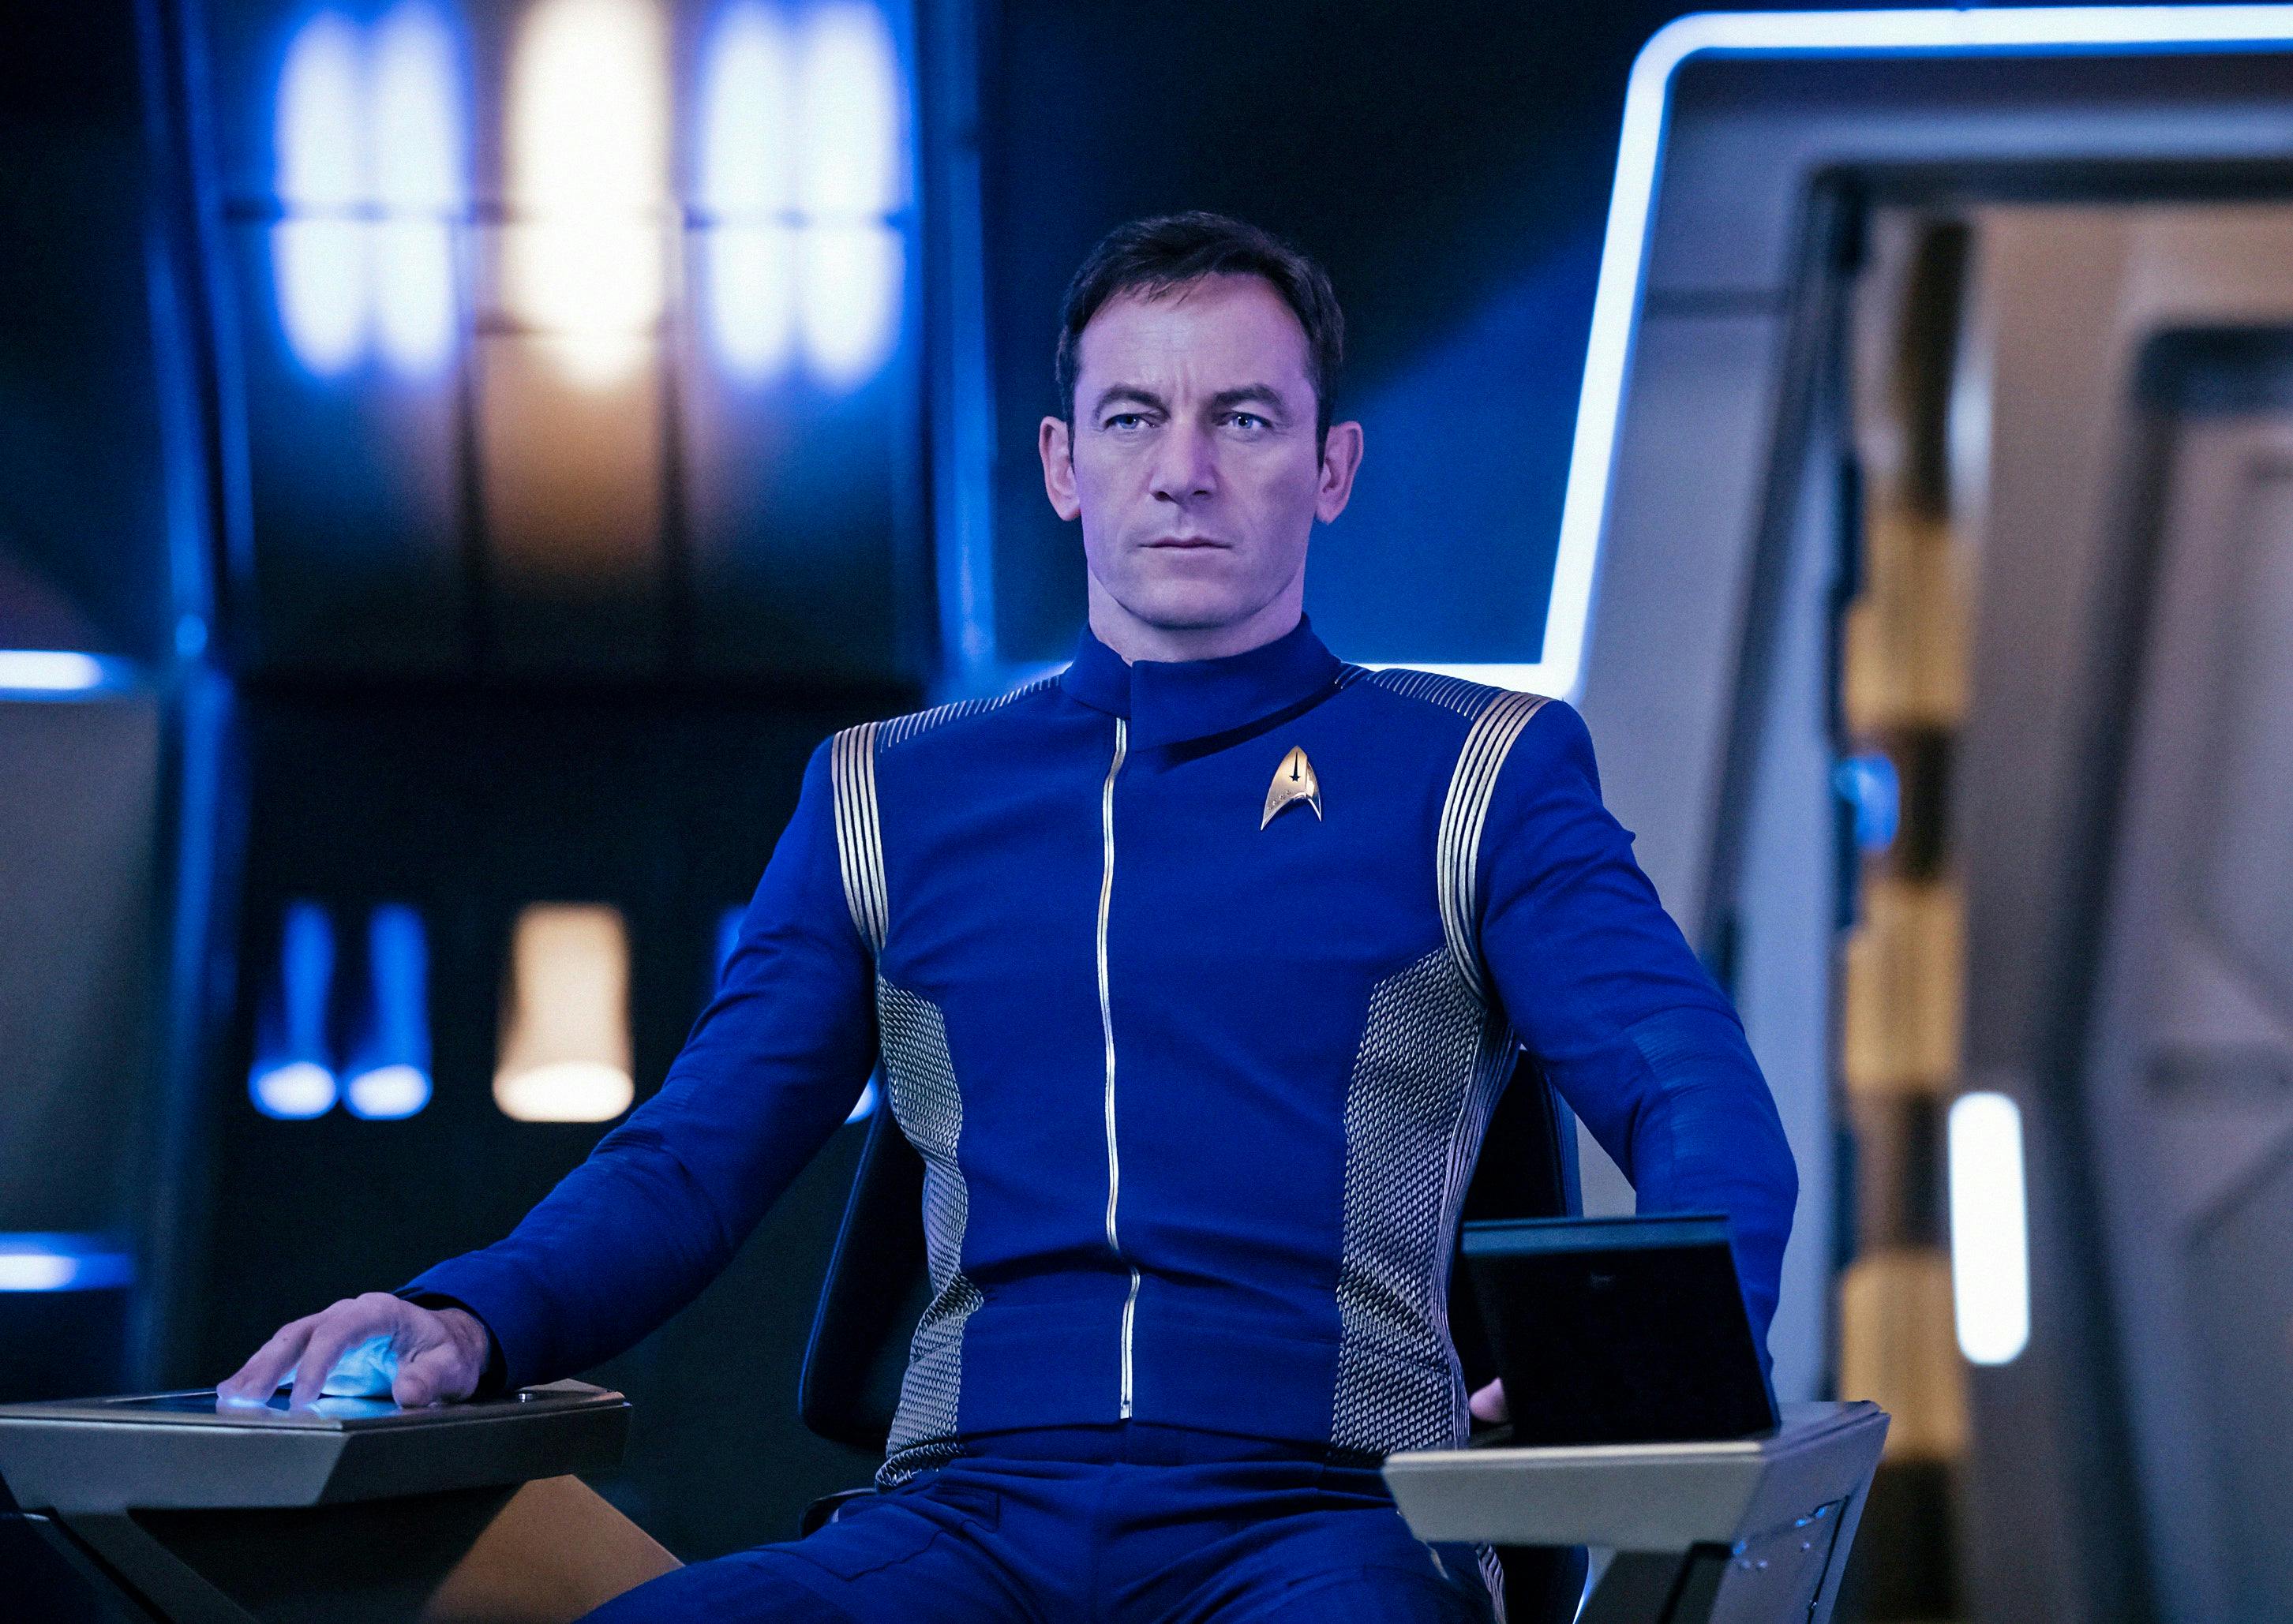 Lorca (Jason Isaacs), wearing the blue Discovery uniform, sits in the captain's chair on the bridge.